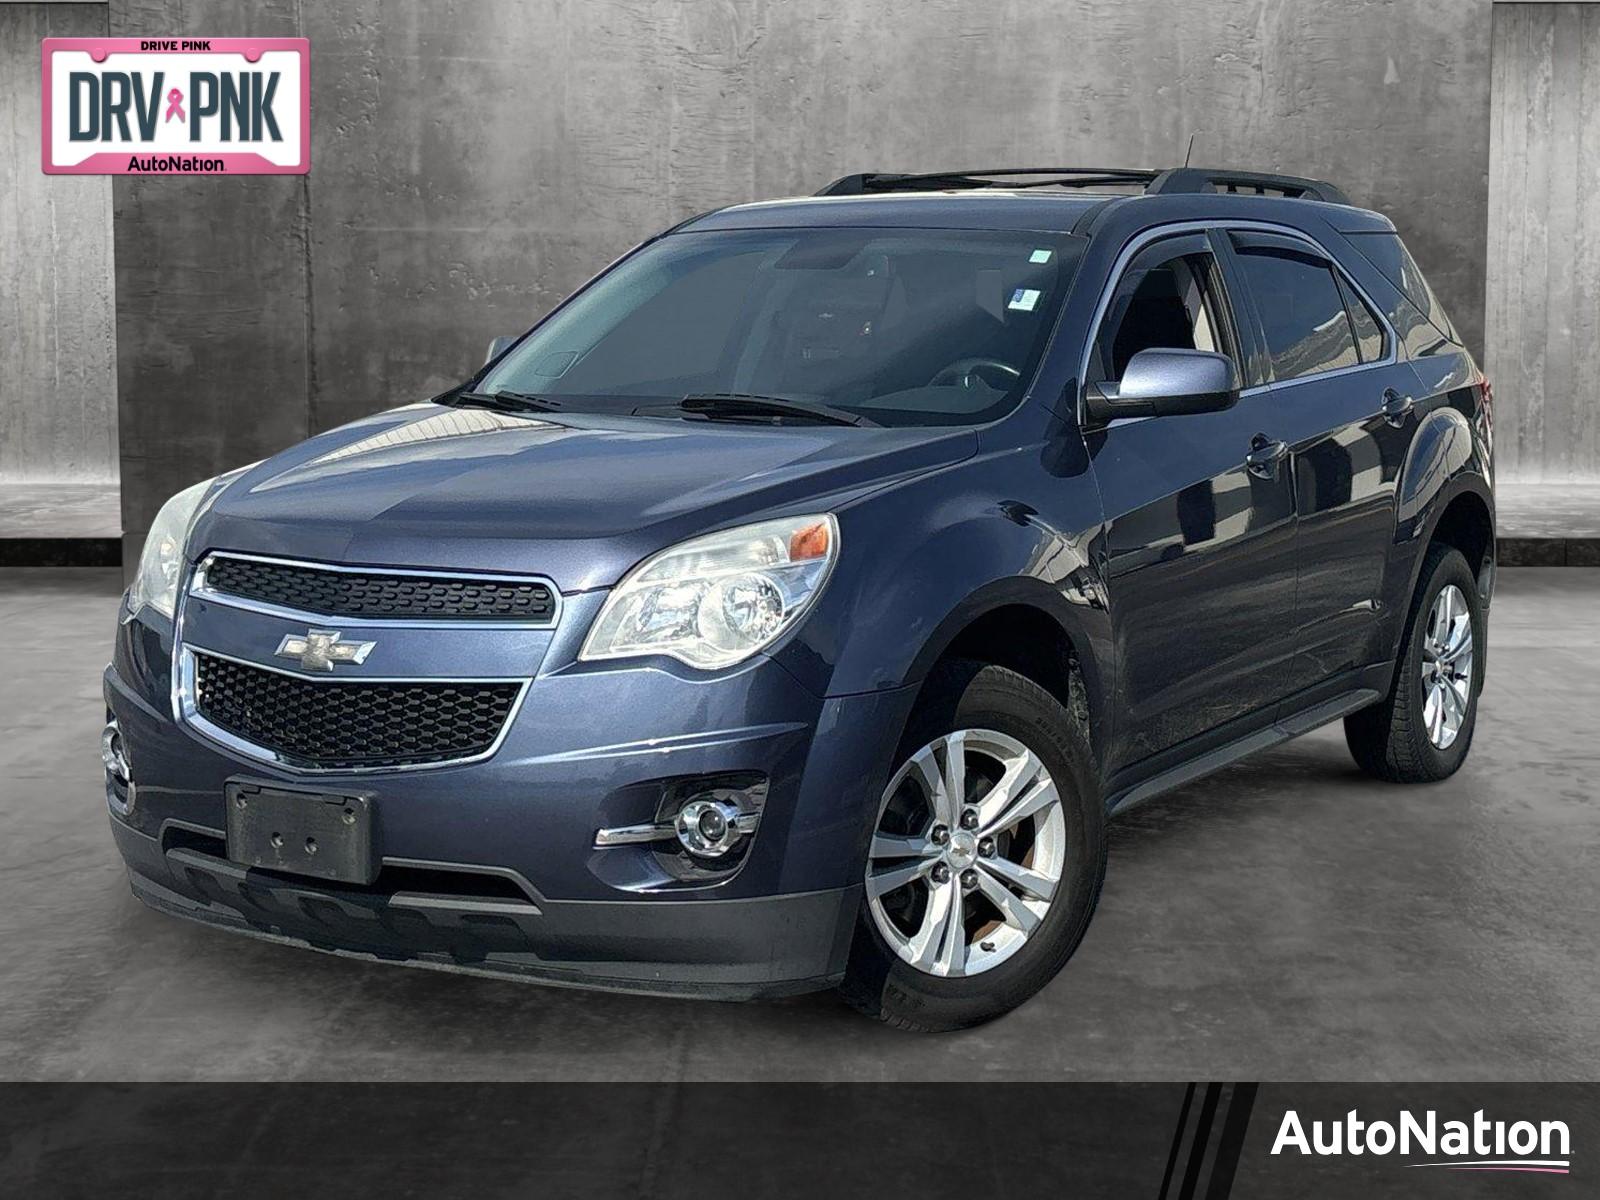 2013 Chevrolet Equinox Vehicle Photo in CLEARWATER, FL 33764-7163